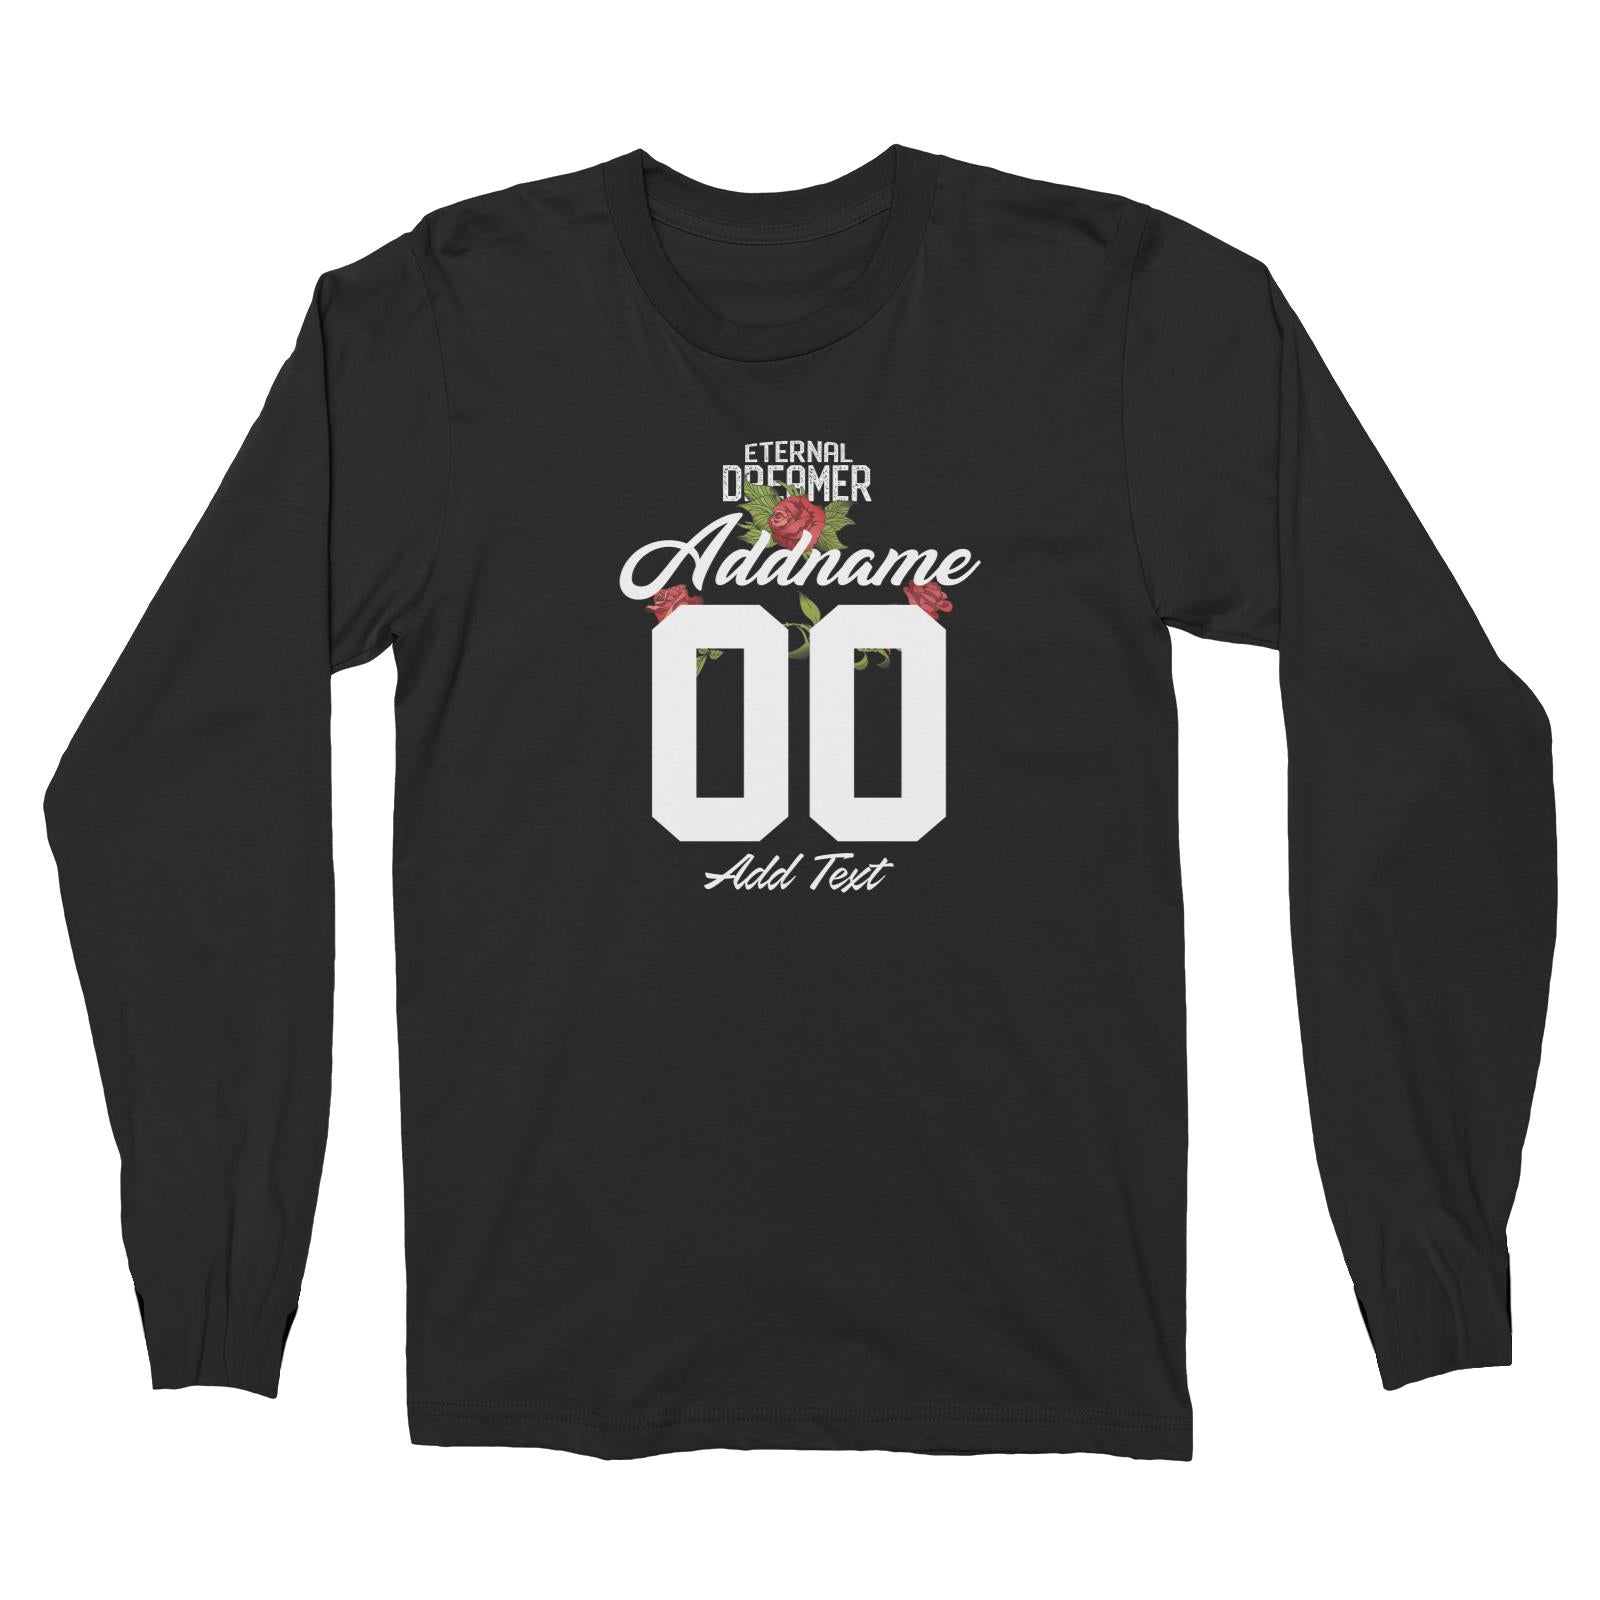 Eternal Dreamer with Roses Personalizable with Name Number and Text Long Sleeve Unisex T-Shirt